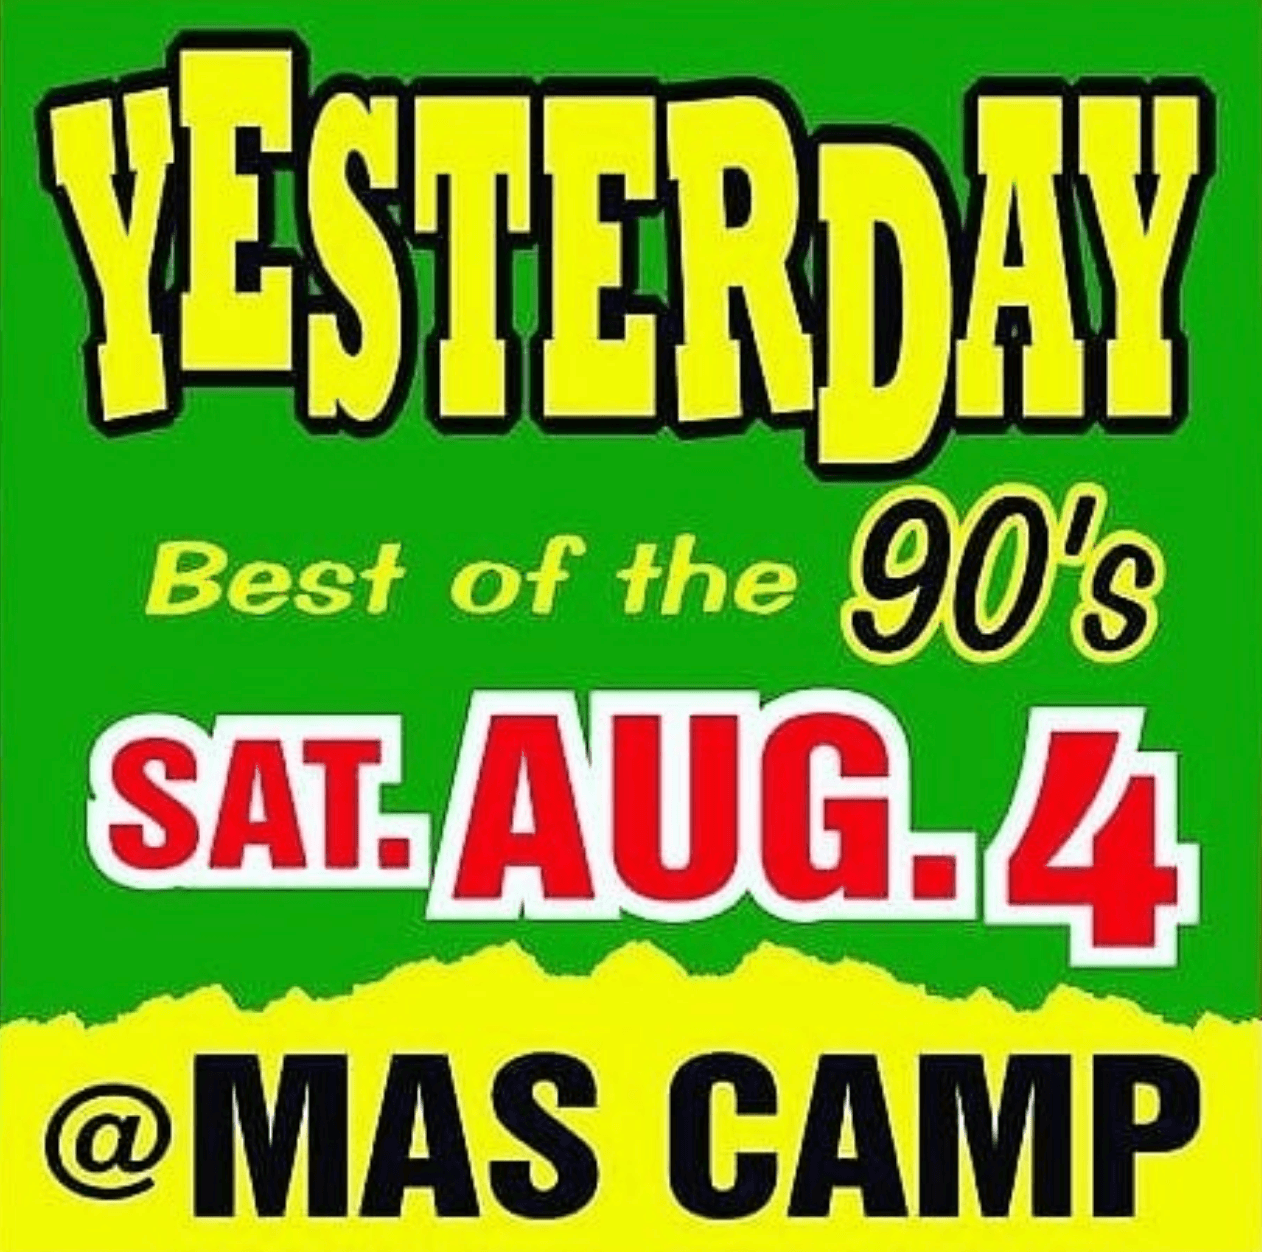 Yesterday Best of the 90's